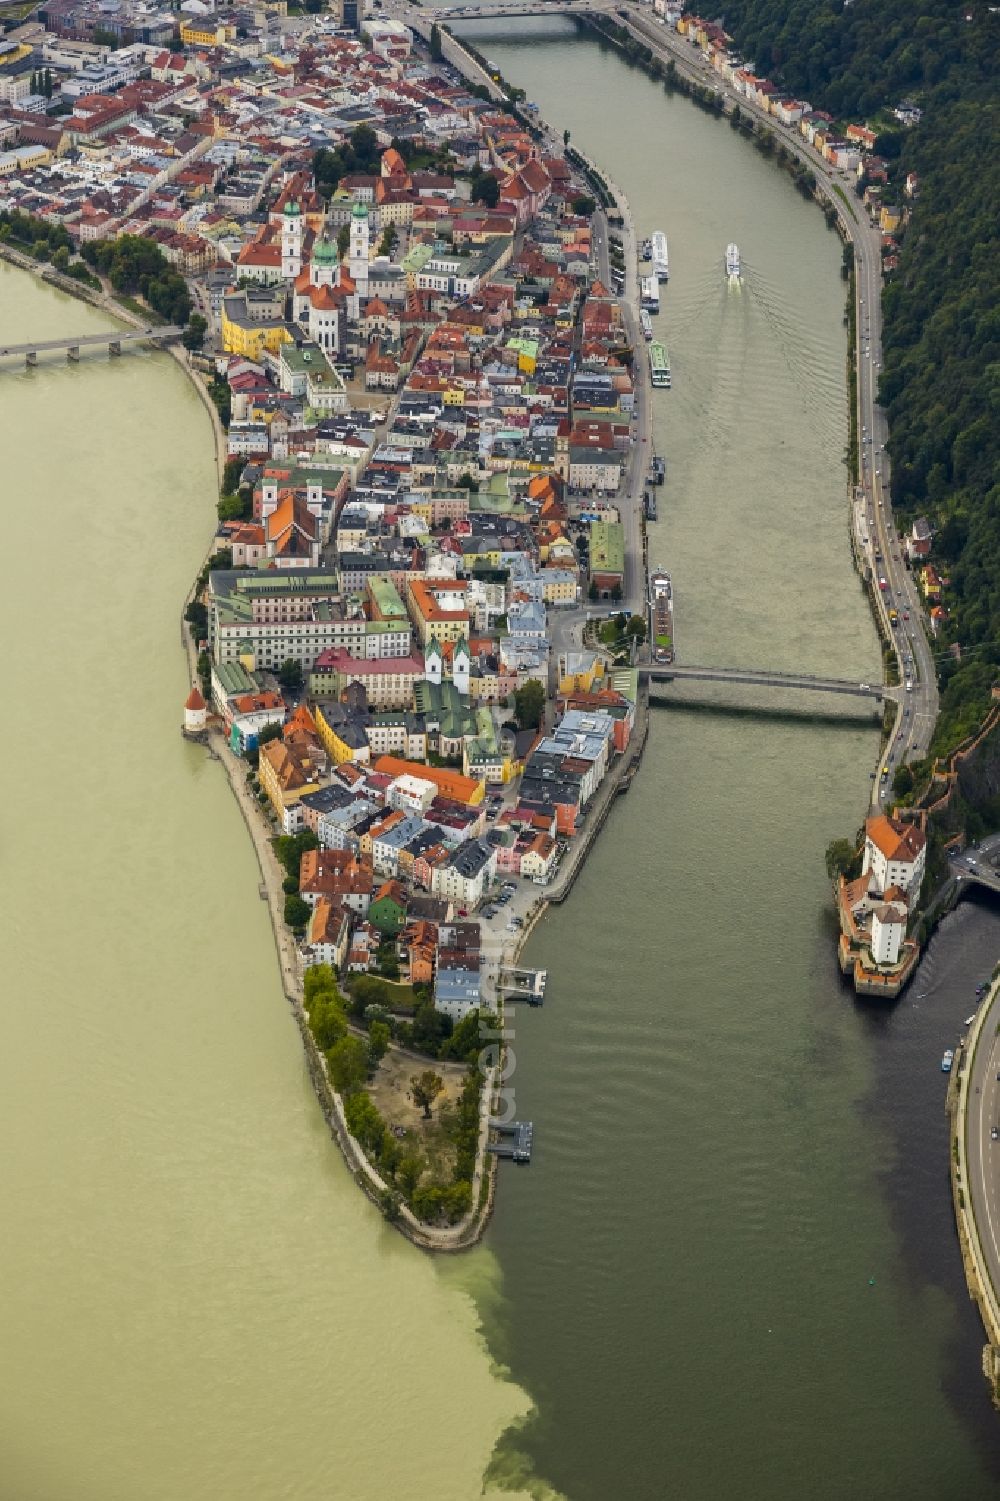 Aerial image Passau - The university town of Passau in the state of Bavaria. Because of the junction of the rivers Ilz, Inn and Danube, Passau is also called Three Rivers Town. Visible here is the pointed peninsula, which is surrounded by the Inn to the South and the Danube to the North. It is the site of the cathedral St. Stephan. The river Ilz joins the other two by running through the Untersolden part of the town